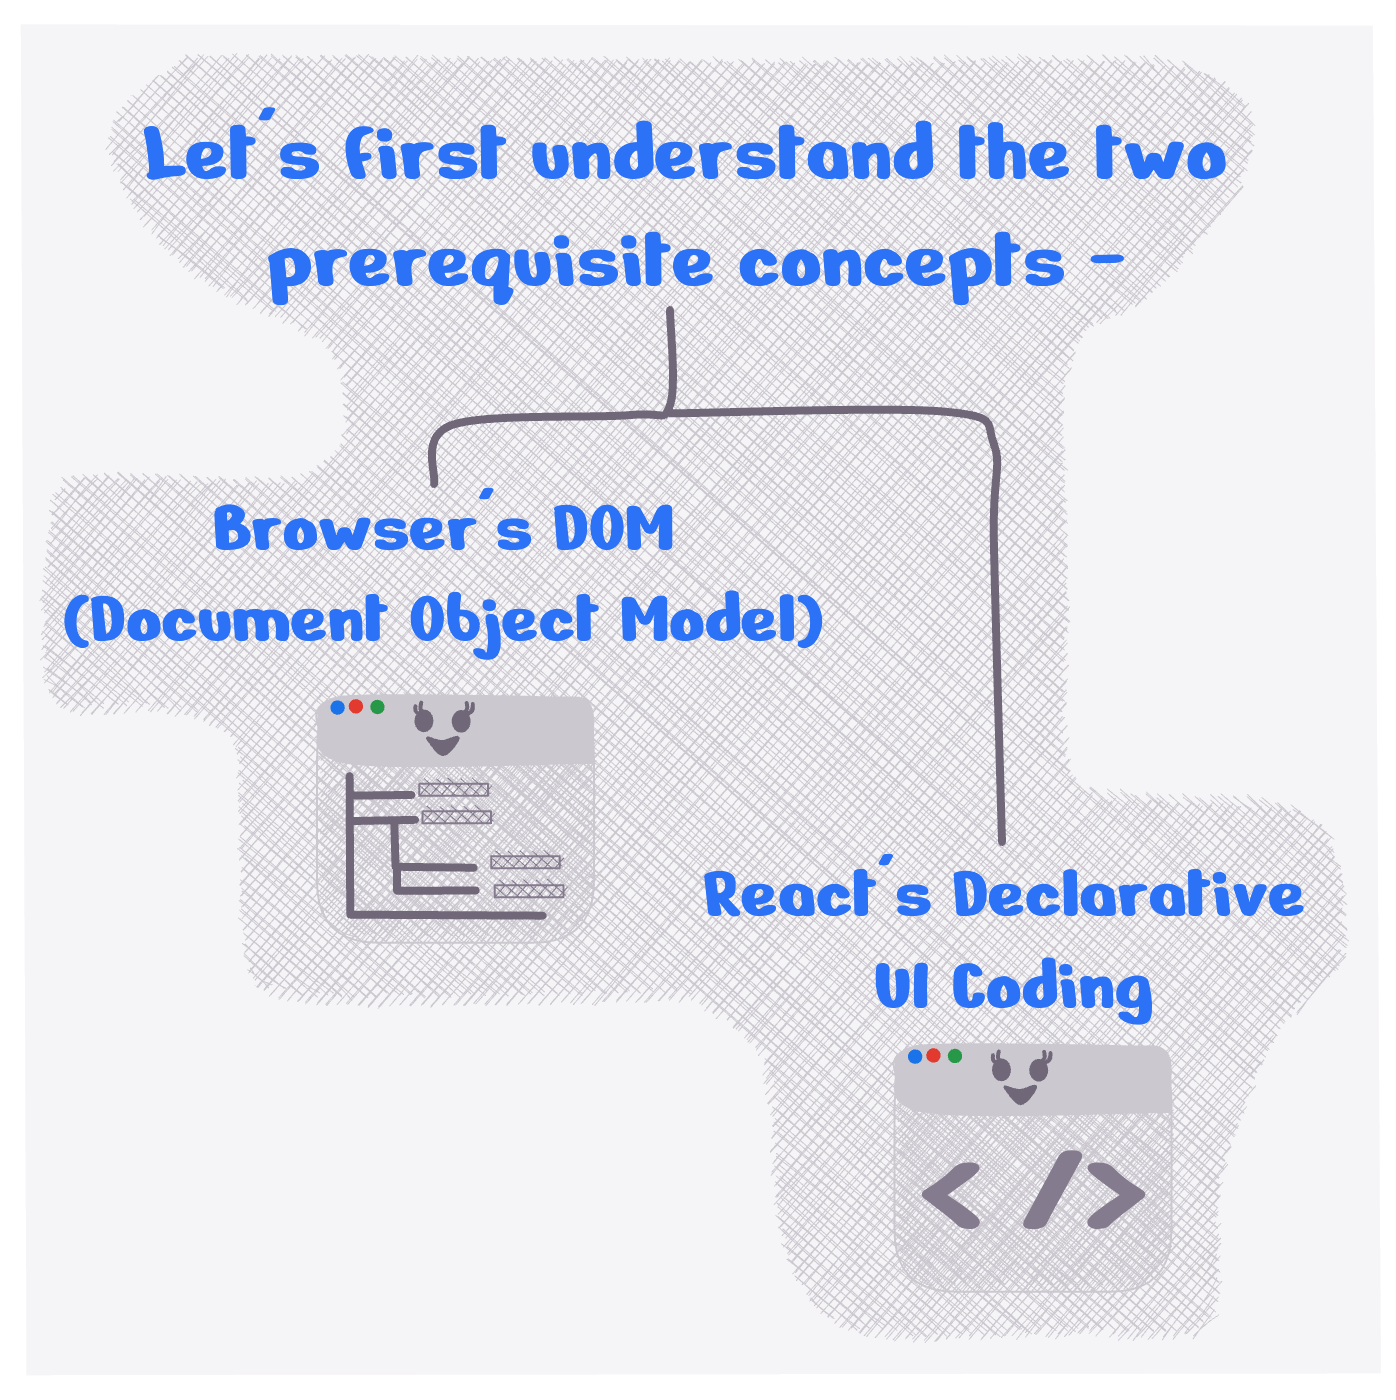 Let's first understand the two prerequisite concepts - Browser's DOM (Document Object Model) and React's Declarative UI Coding